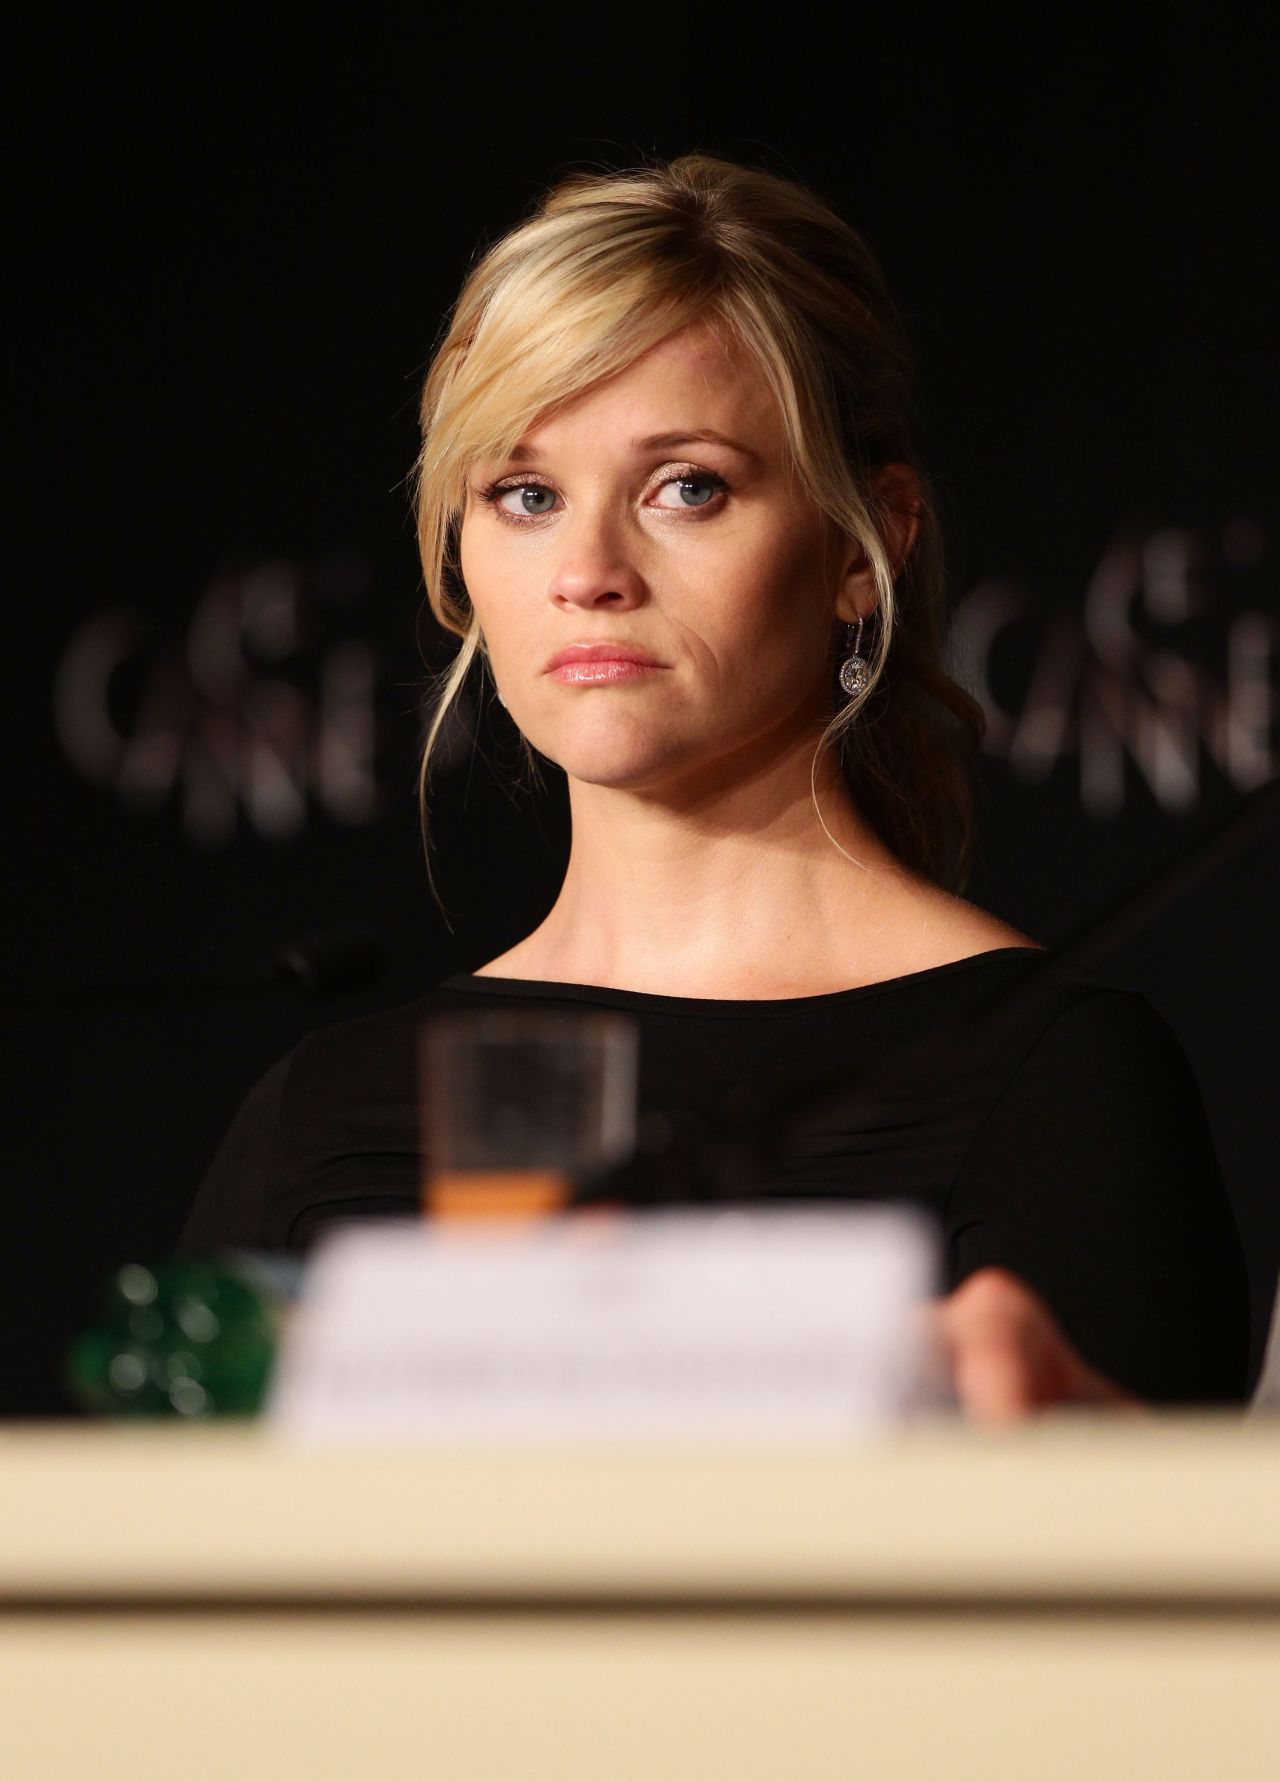 "I had someone correct my grammar once on a blind date, and within the first 10 minutes the date was over," Witherspoon said <a href="http://www.seventeen.com/entertainment/features/reese-witherspoon-how-do-you-know" target="_blank" target="_blank">during an interview with Seventeen Magazine.</a>"You just don't correct somebody's grammar. That's just not OK."